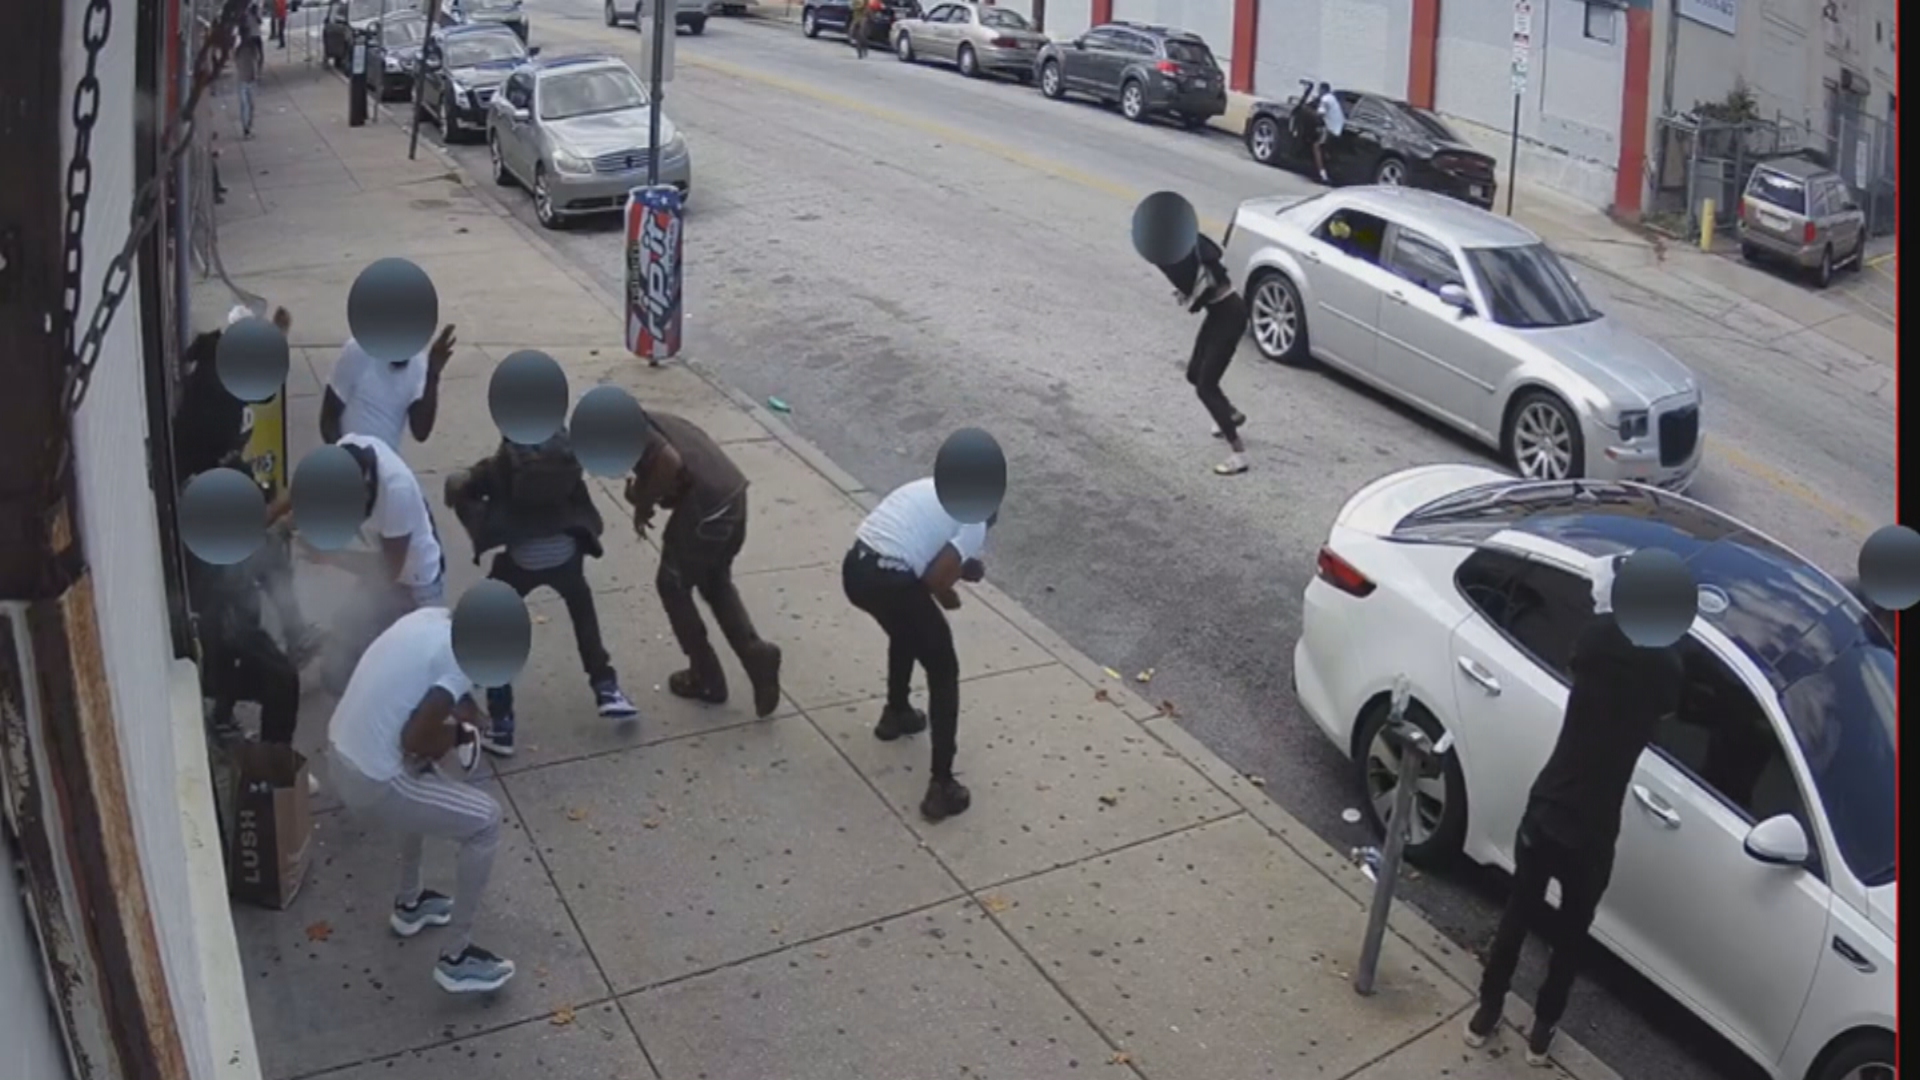 WATCH: Surveillance Video Catches Fern Rock Drive-By Shooting That Killed 1, Injured 5